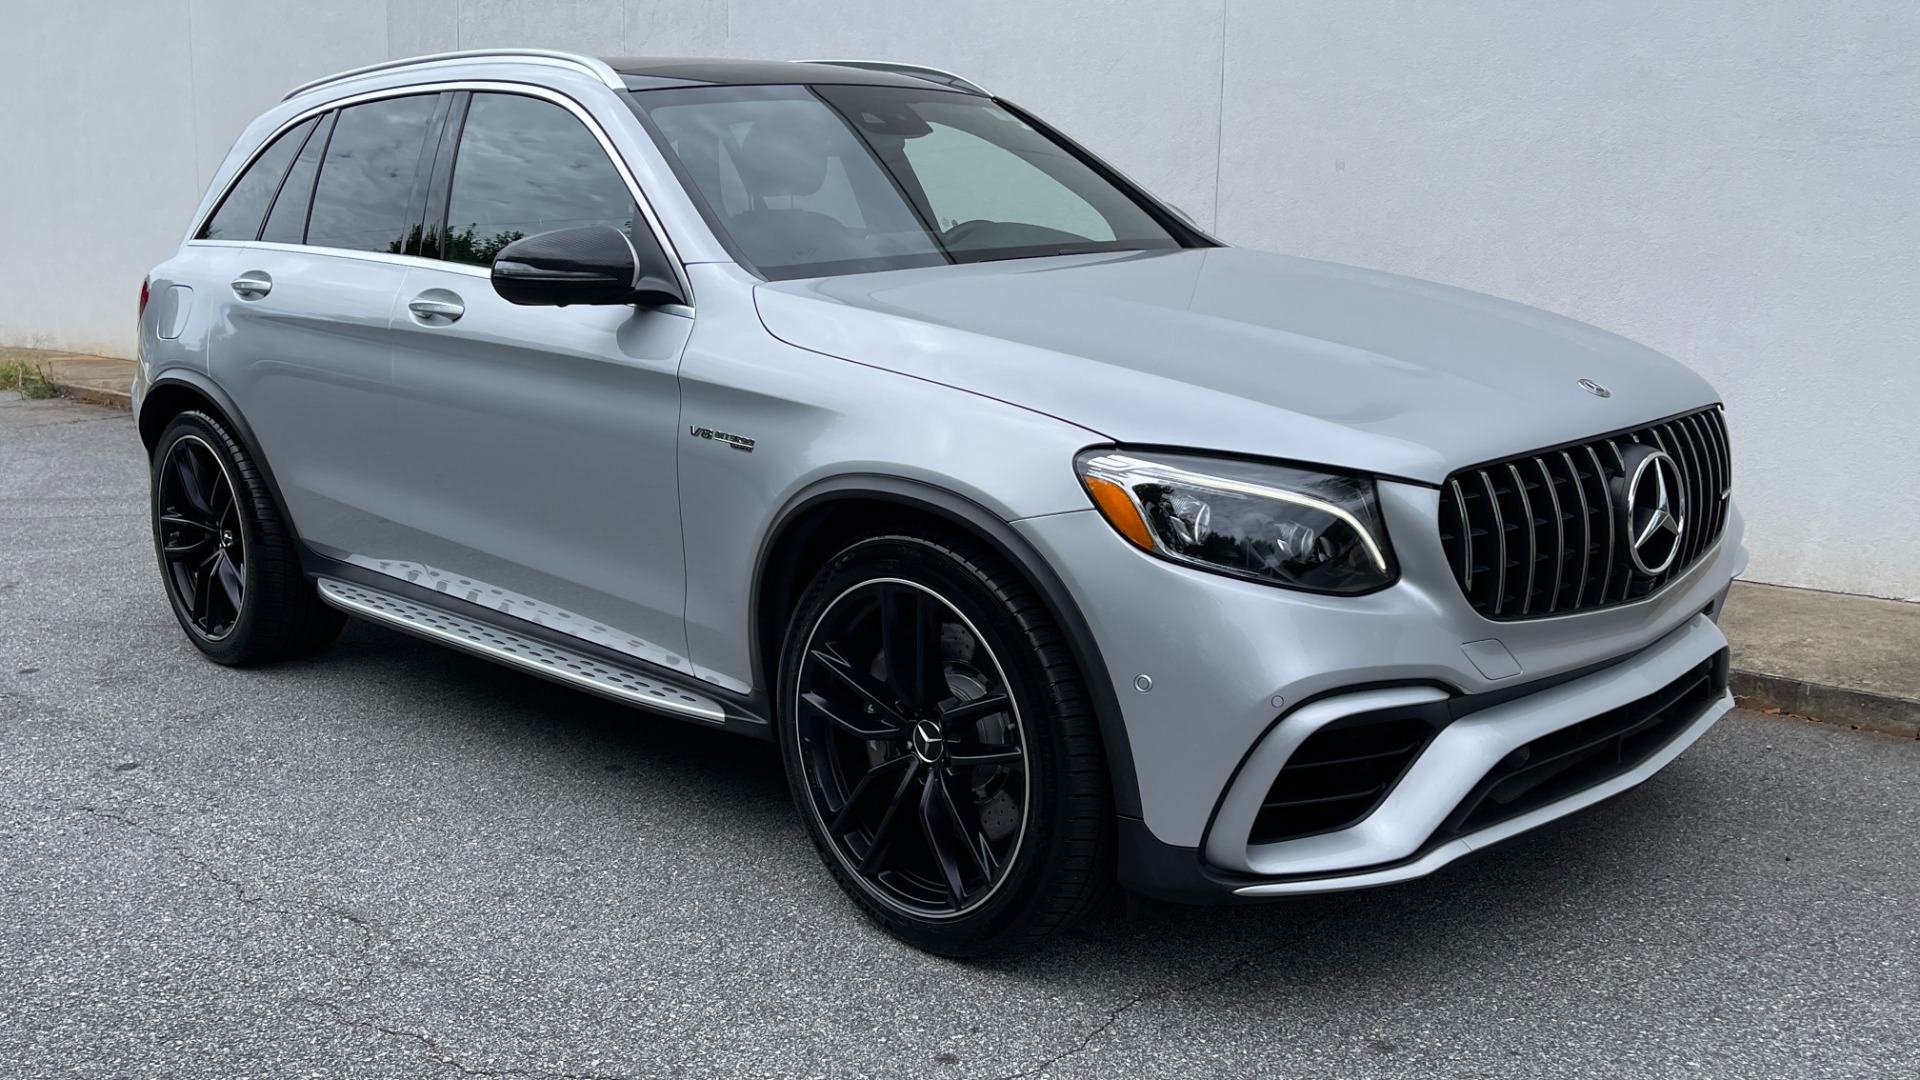 Used 2019 Mercedes-Benz GLC AMG GLC 63 / 4MATIC+ / PANORAMIC ROOF / CARBON FIBER / LIGHT PACKAGE / PERF for sale $60,495 at Formula Imports in Charlotte NC 28227 2